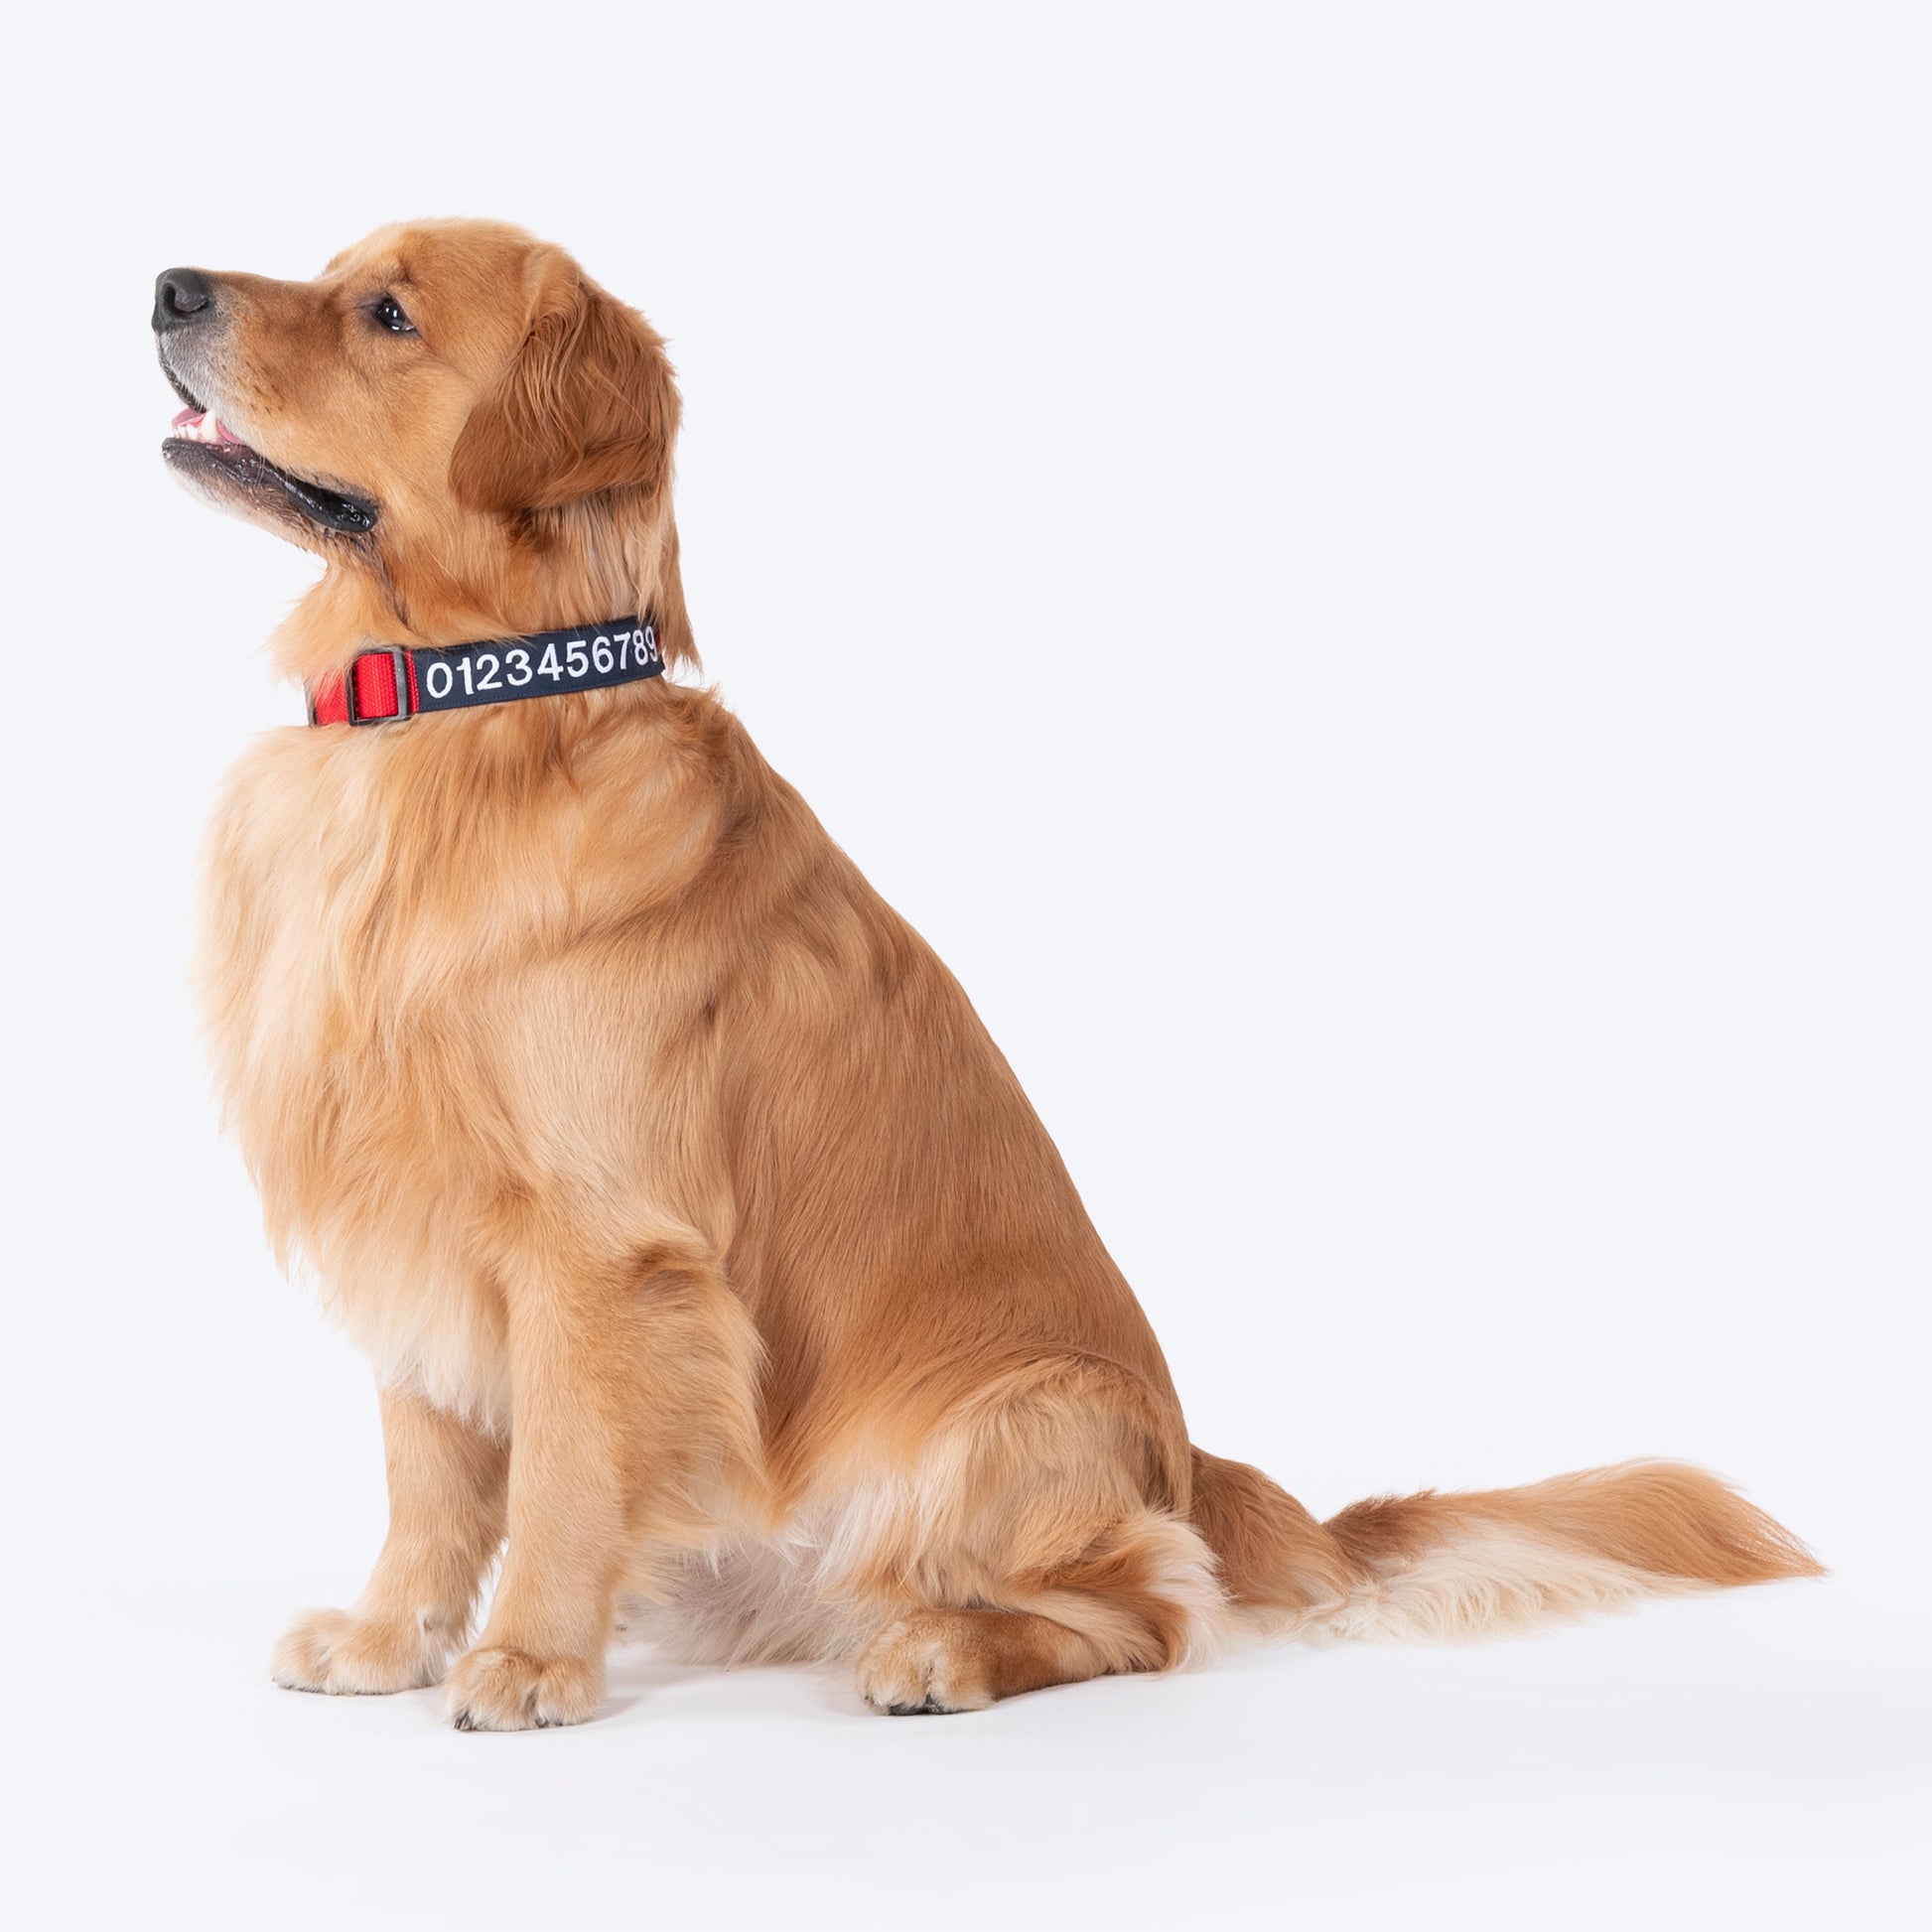 HUFT Personalised (Mobile No.) Basics Dog Collar - Crimson Red - Heads Up For Tails